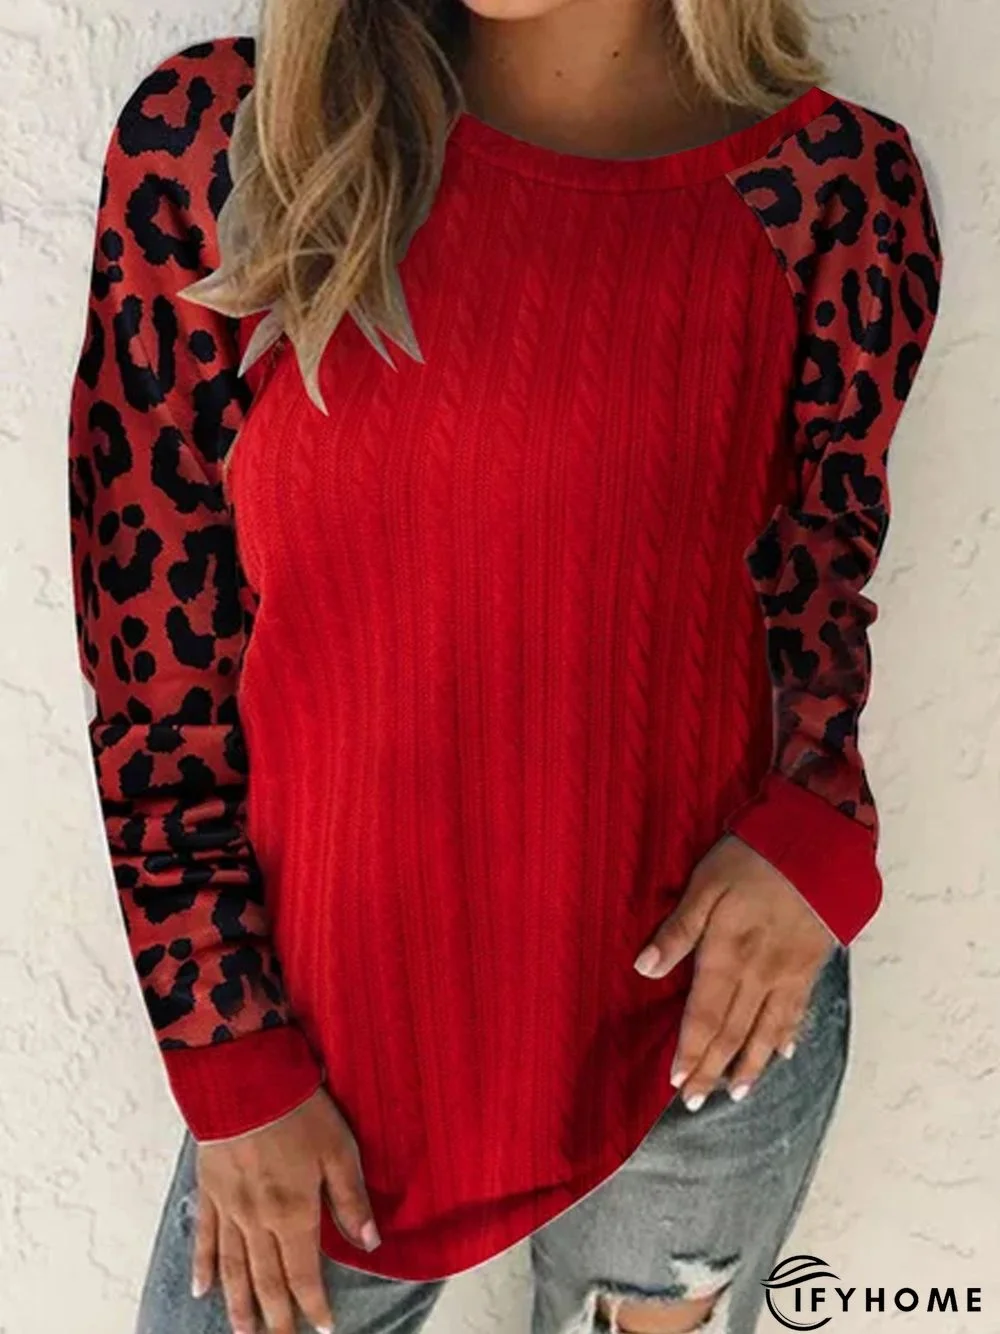 Long sleeve crew neck plain twist fabric stitched leopard top T-shirt | IFYHOME